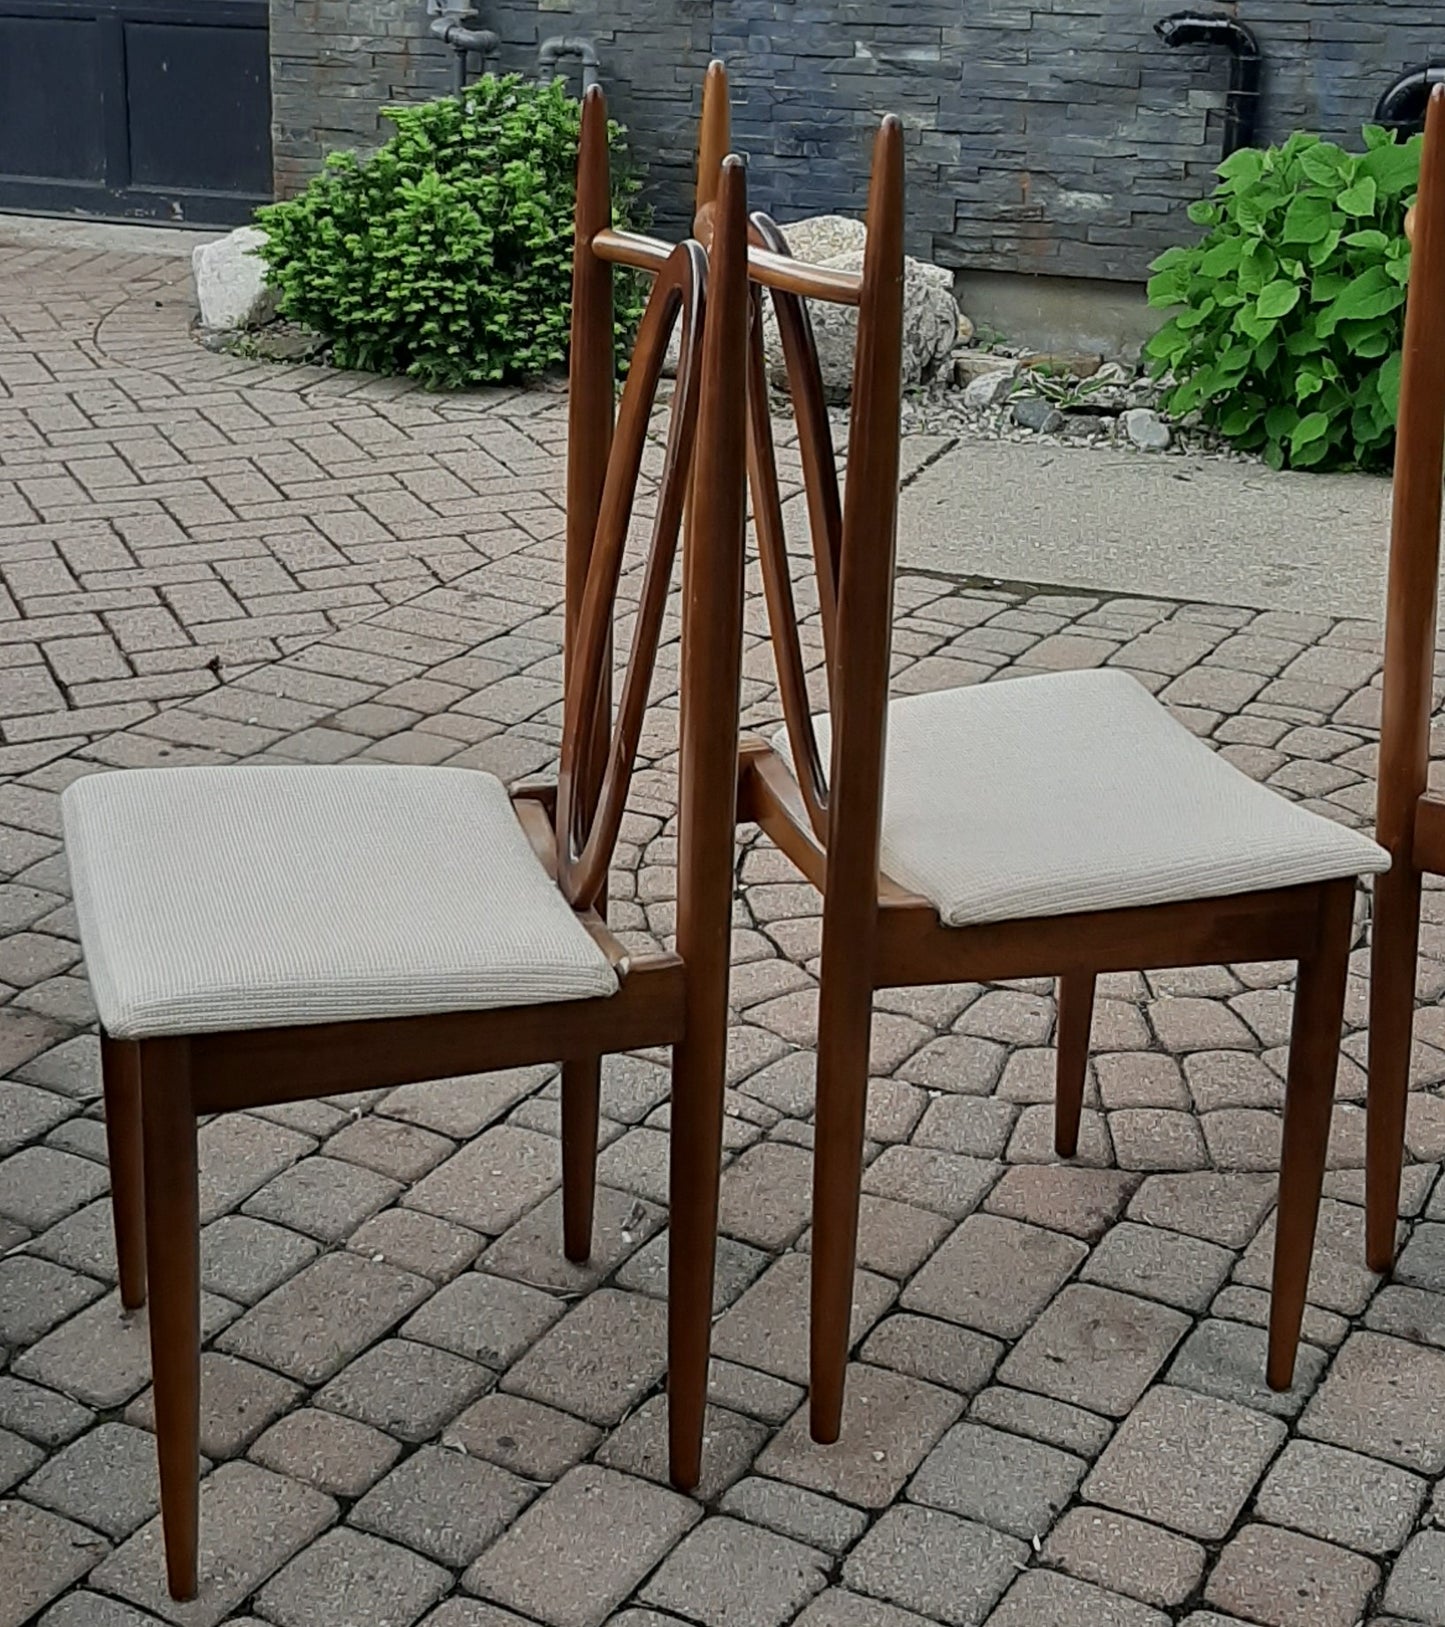 Set of 6 MCM Walnut Chairs by Honderich, RESTORED, REUPHOLSTERED (for Milosz)